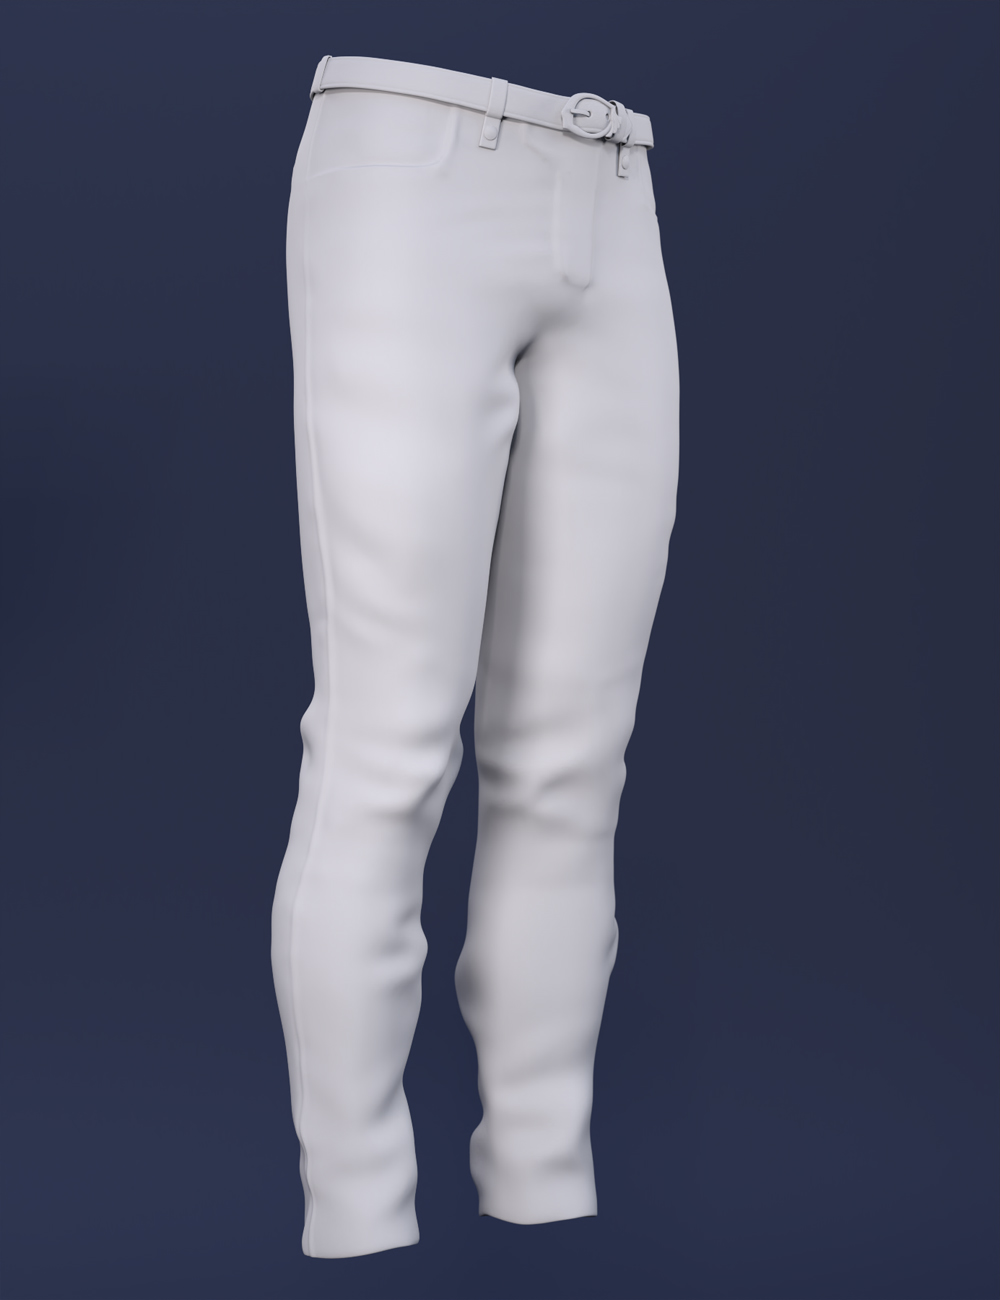 Shadow Realm Pants for Genesis 8 and 8.1 Males by: Barbara BrundonUmblefugly, 3D Models by Daz 3D